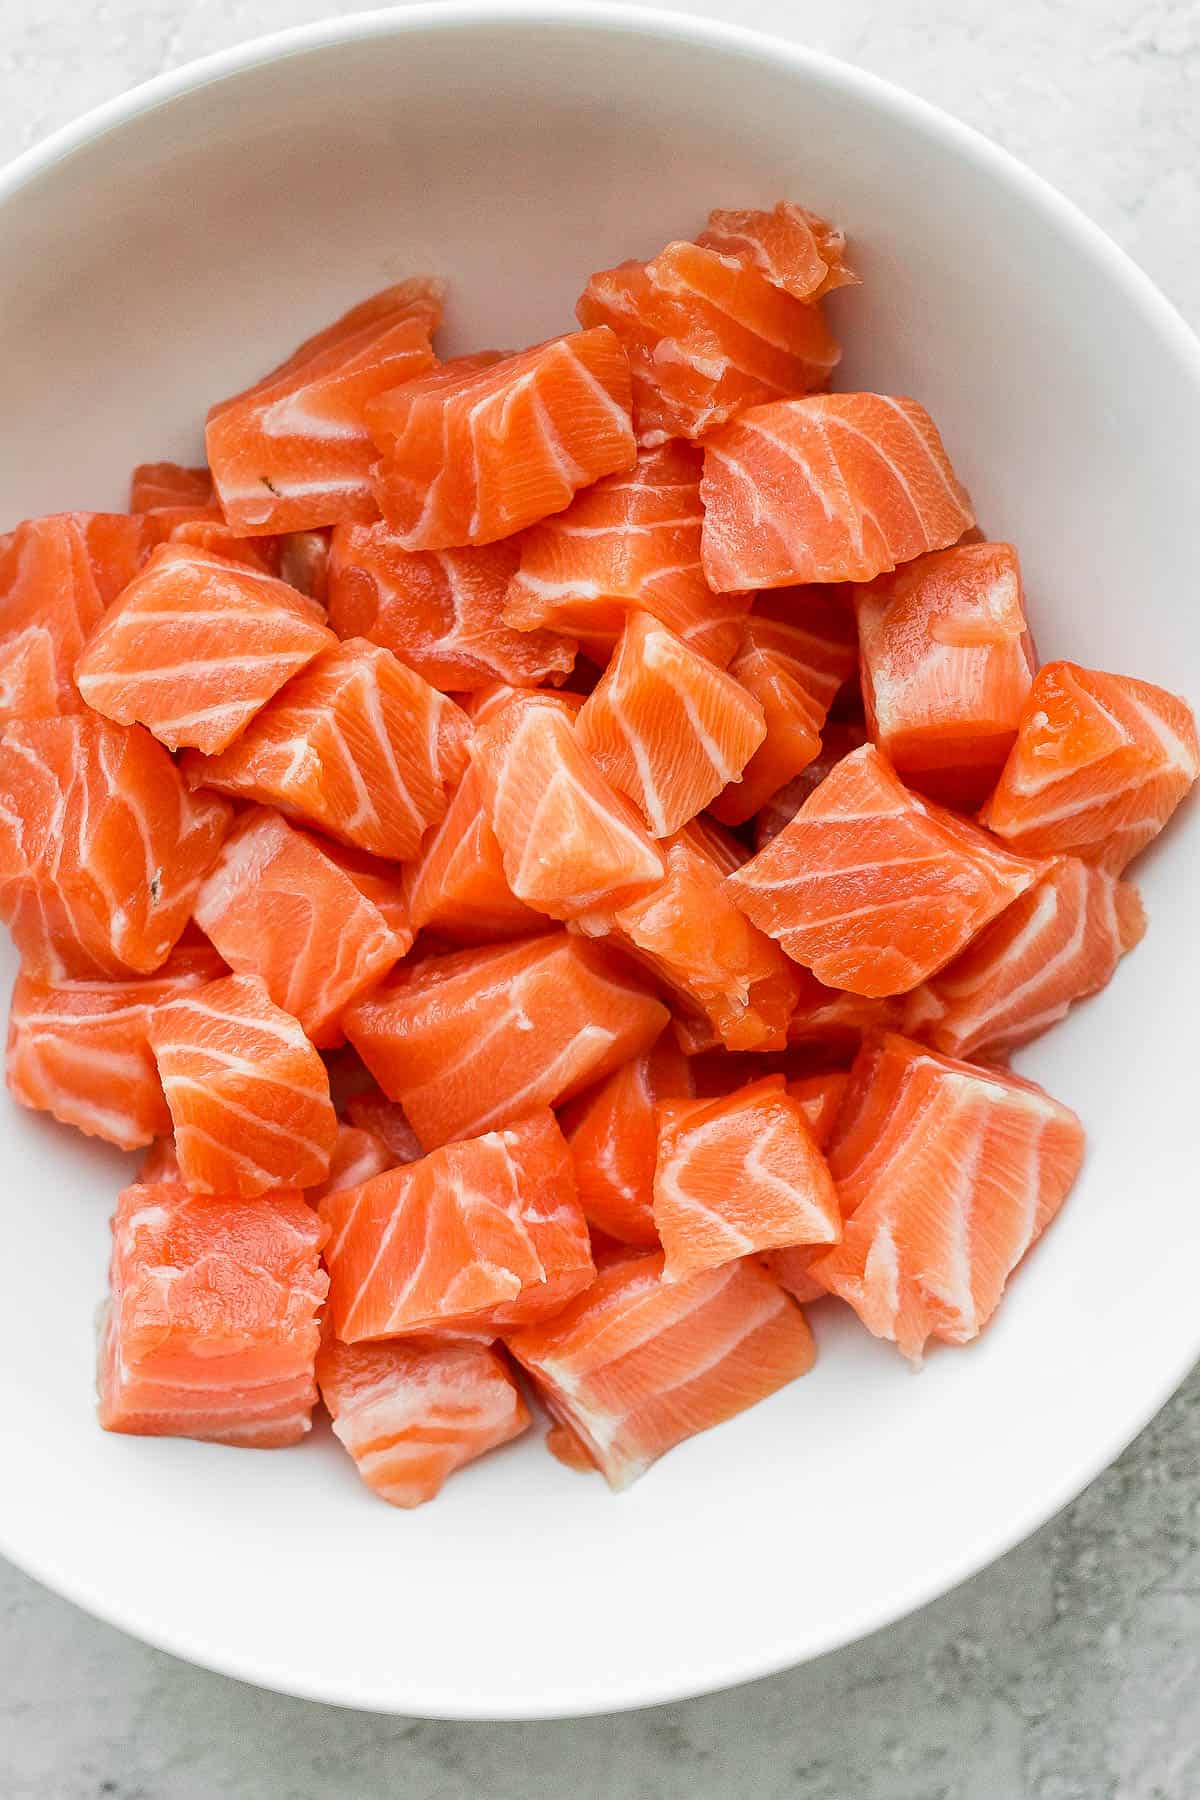 One-inch cubes of salmon in a bowl.